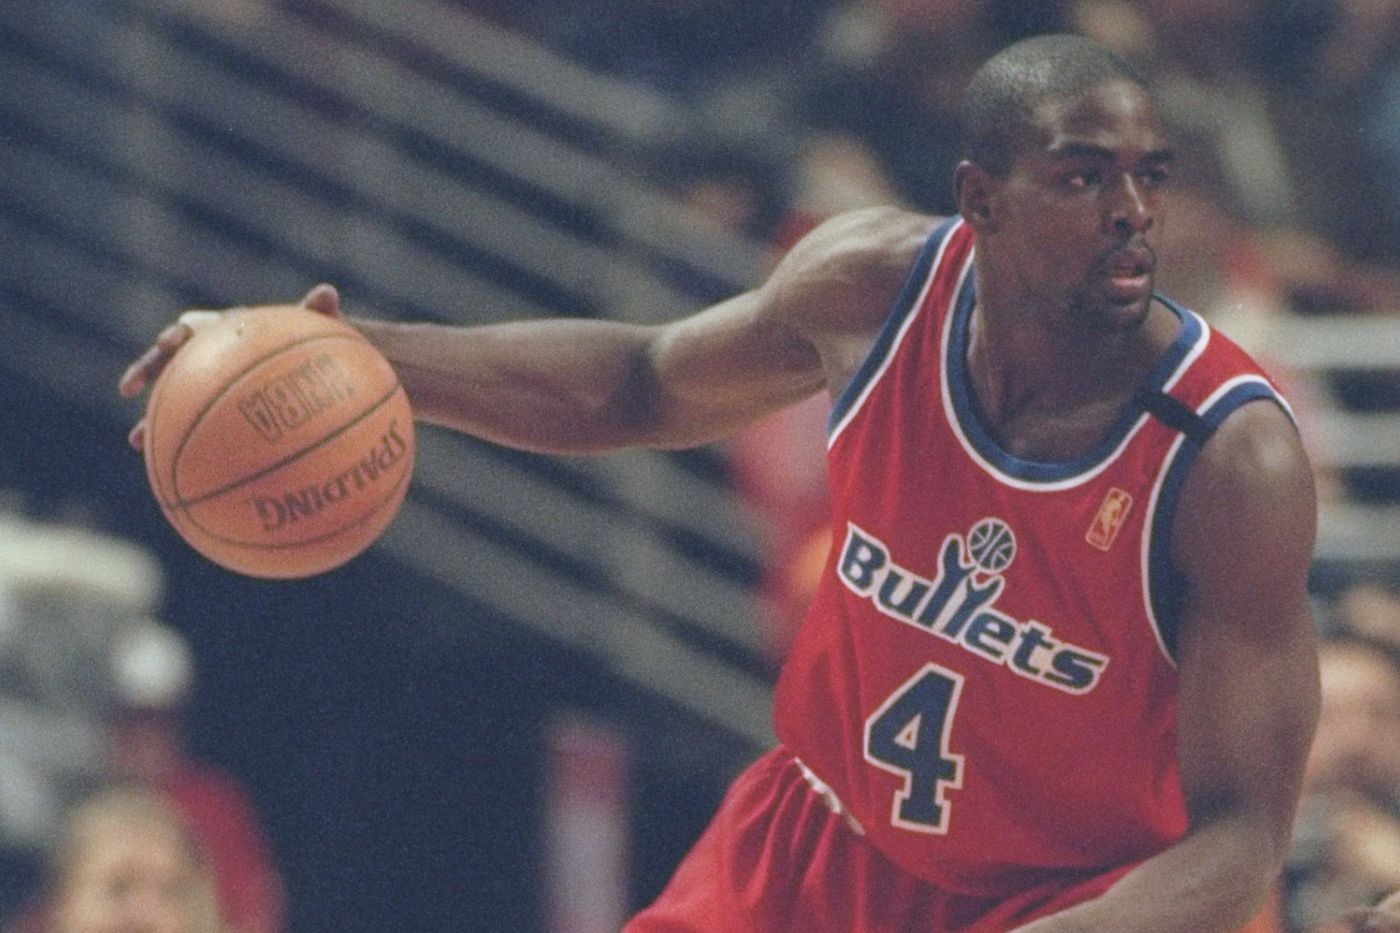 Nine things you may not have known about Chris Webber's time in Washington